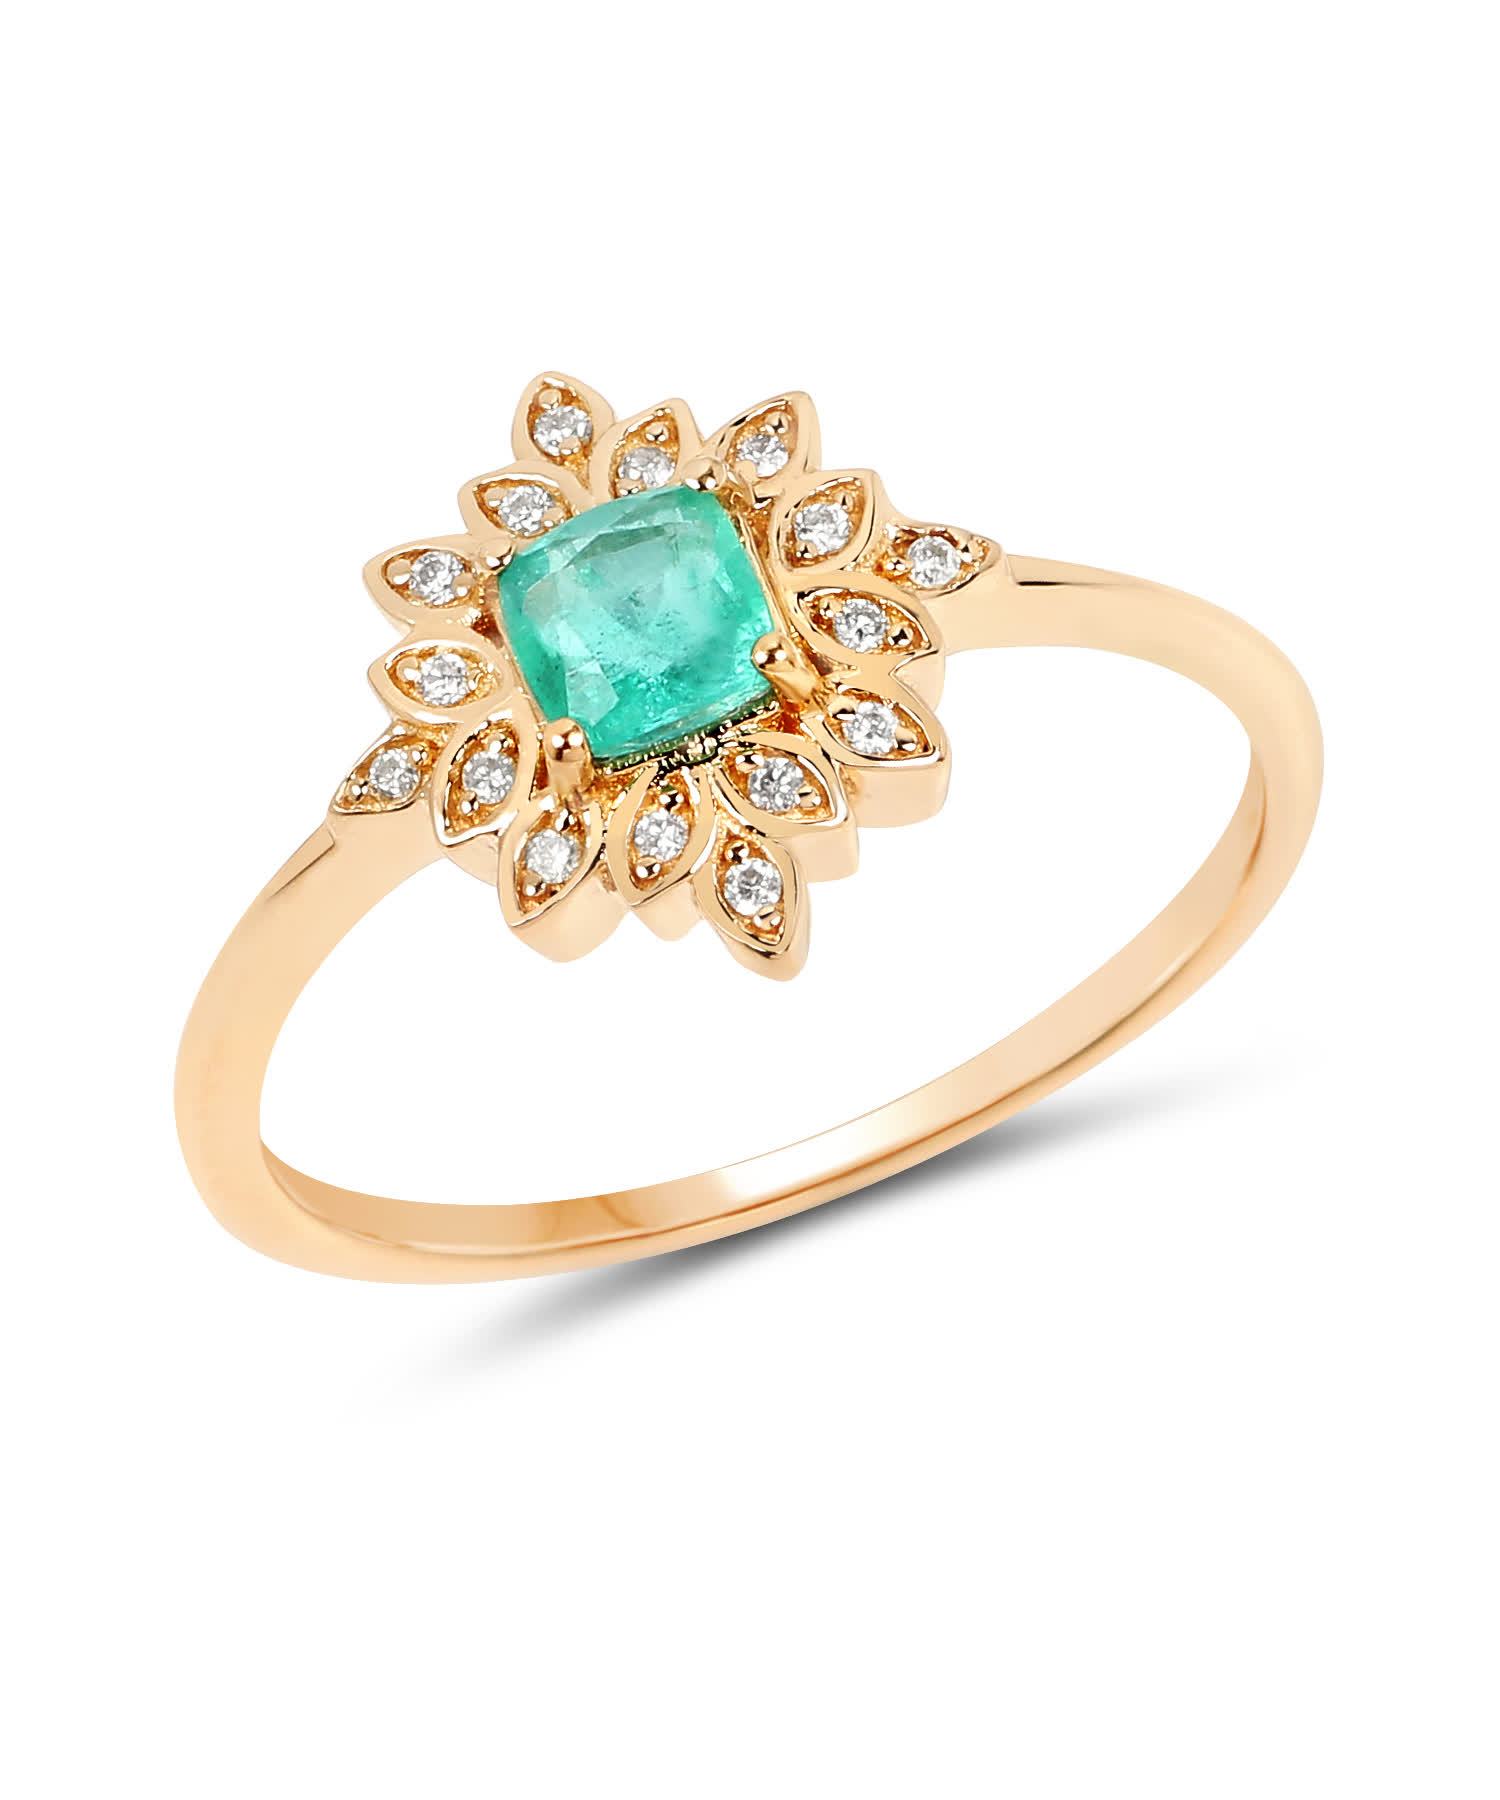 0.40ctw Natural Zambian Emerald and Diamond 14k Gold Flower Right Hand Ring View 1